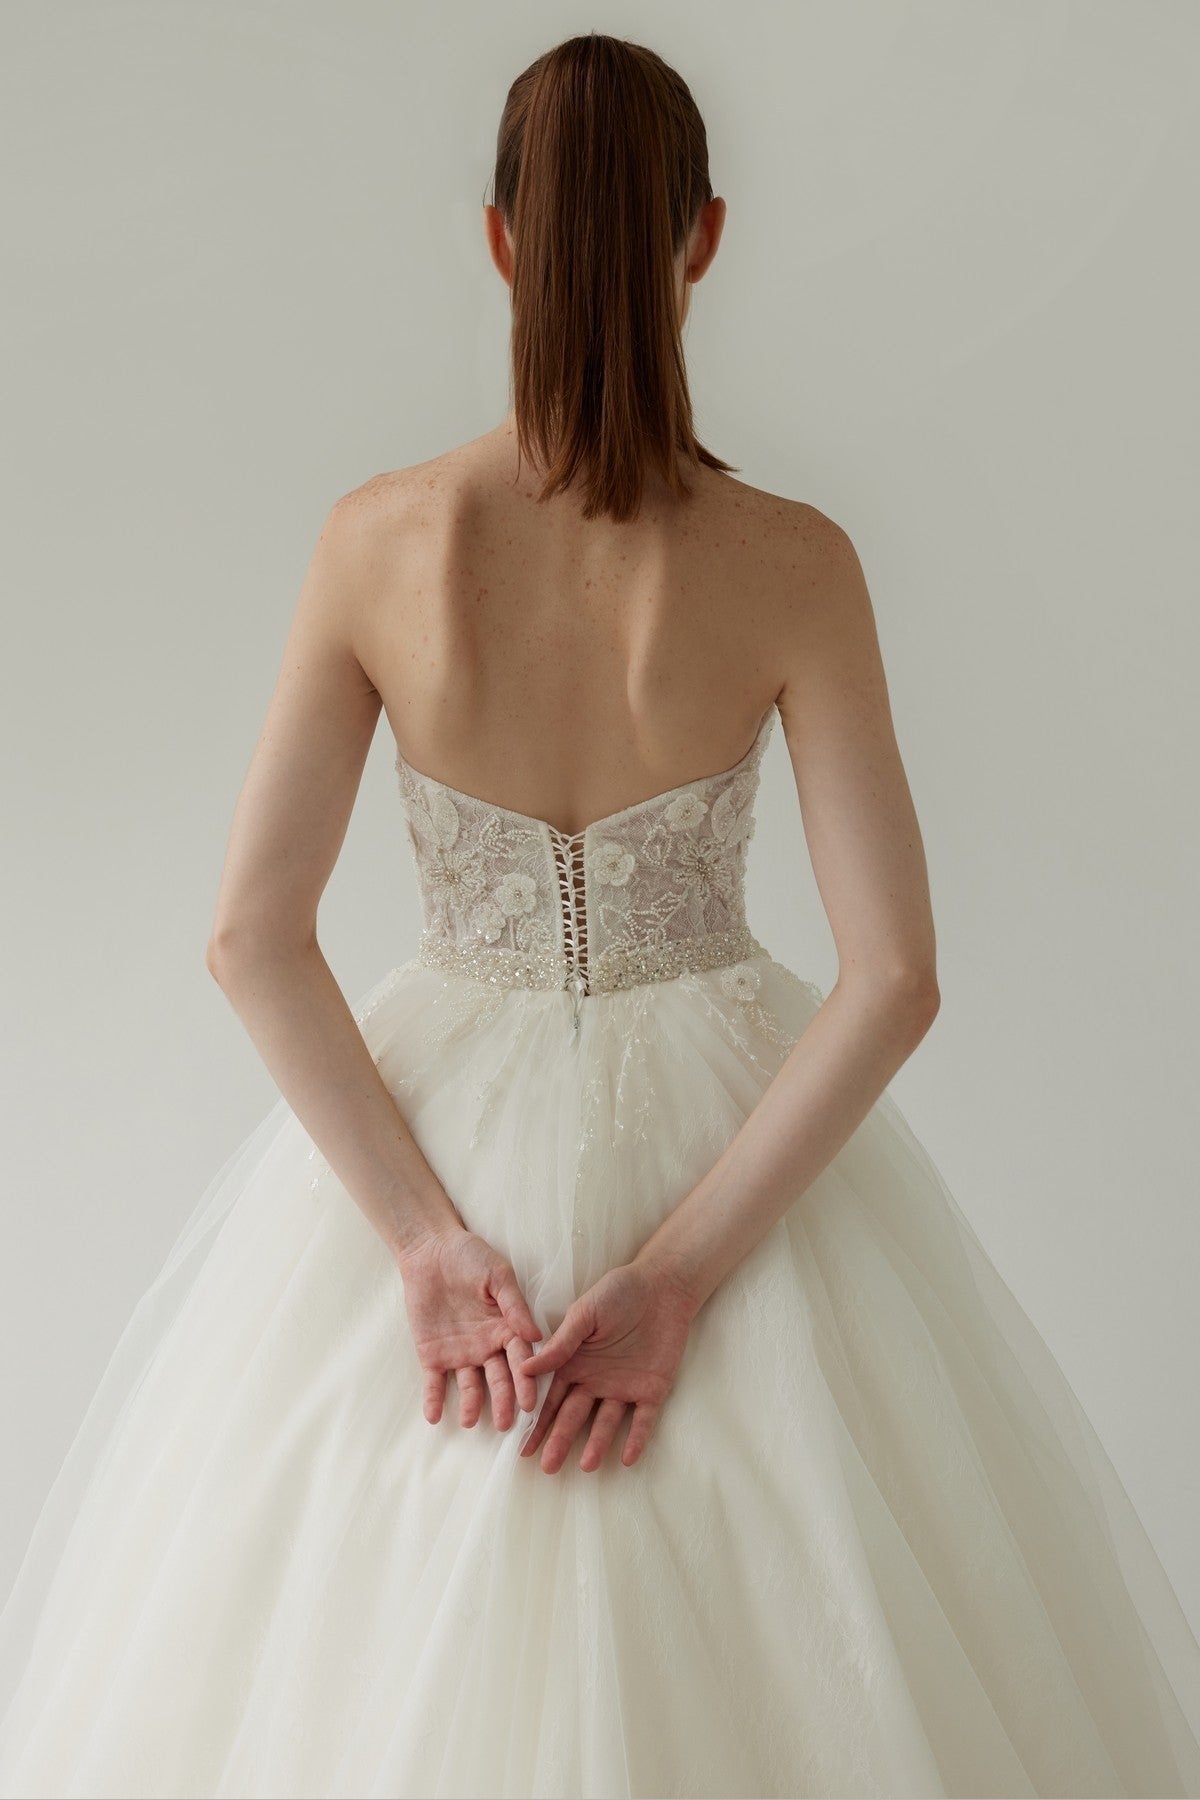 Strapless A-Line Wedding Dress with Drape Detail and Sweetheart Neckline